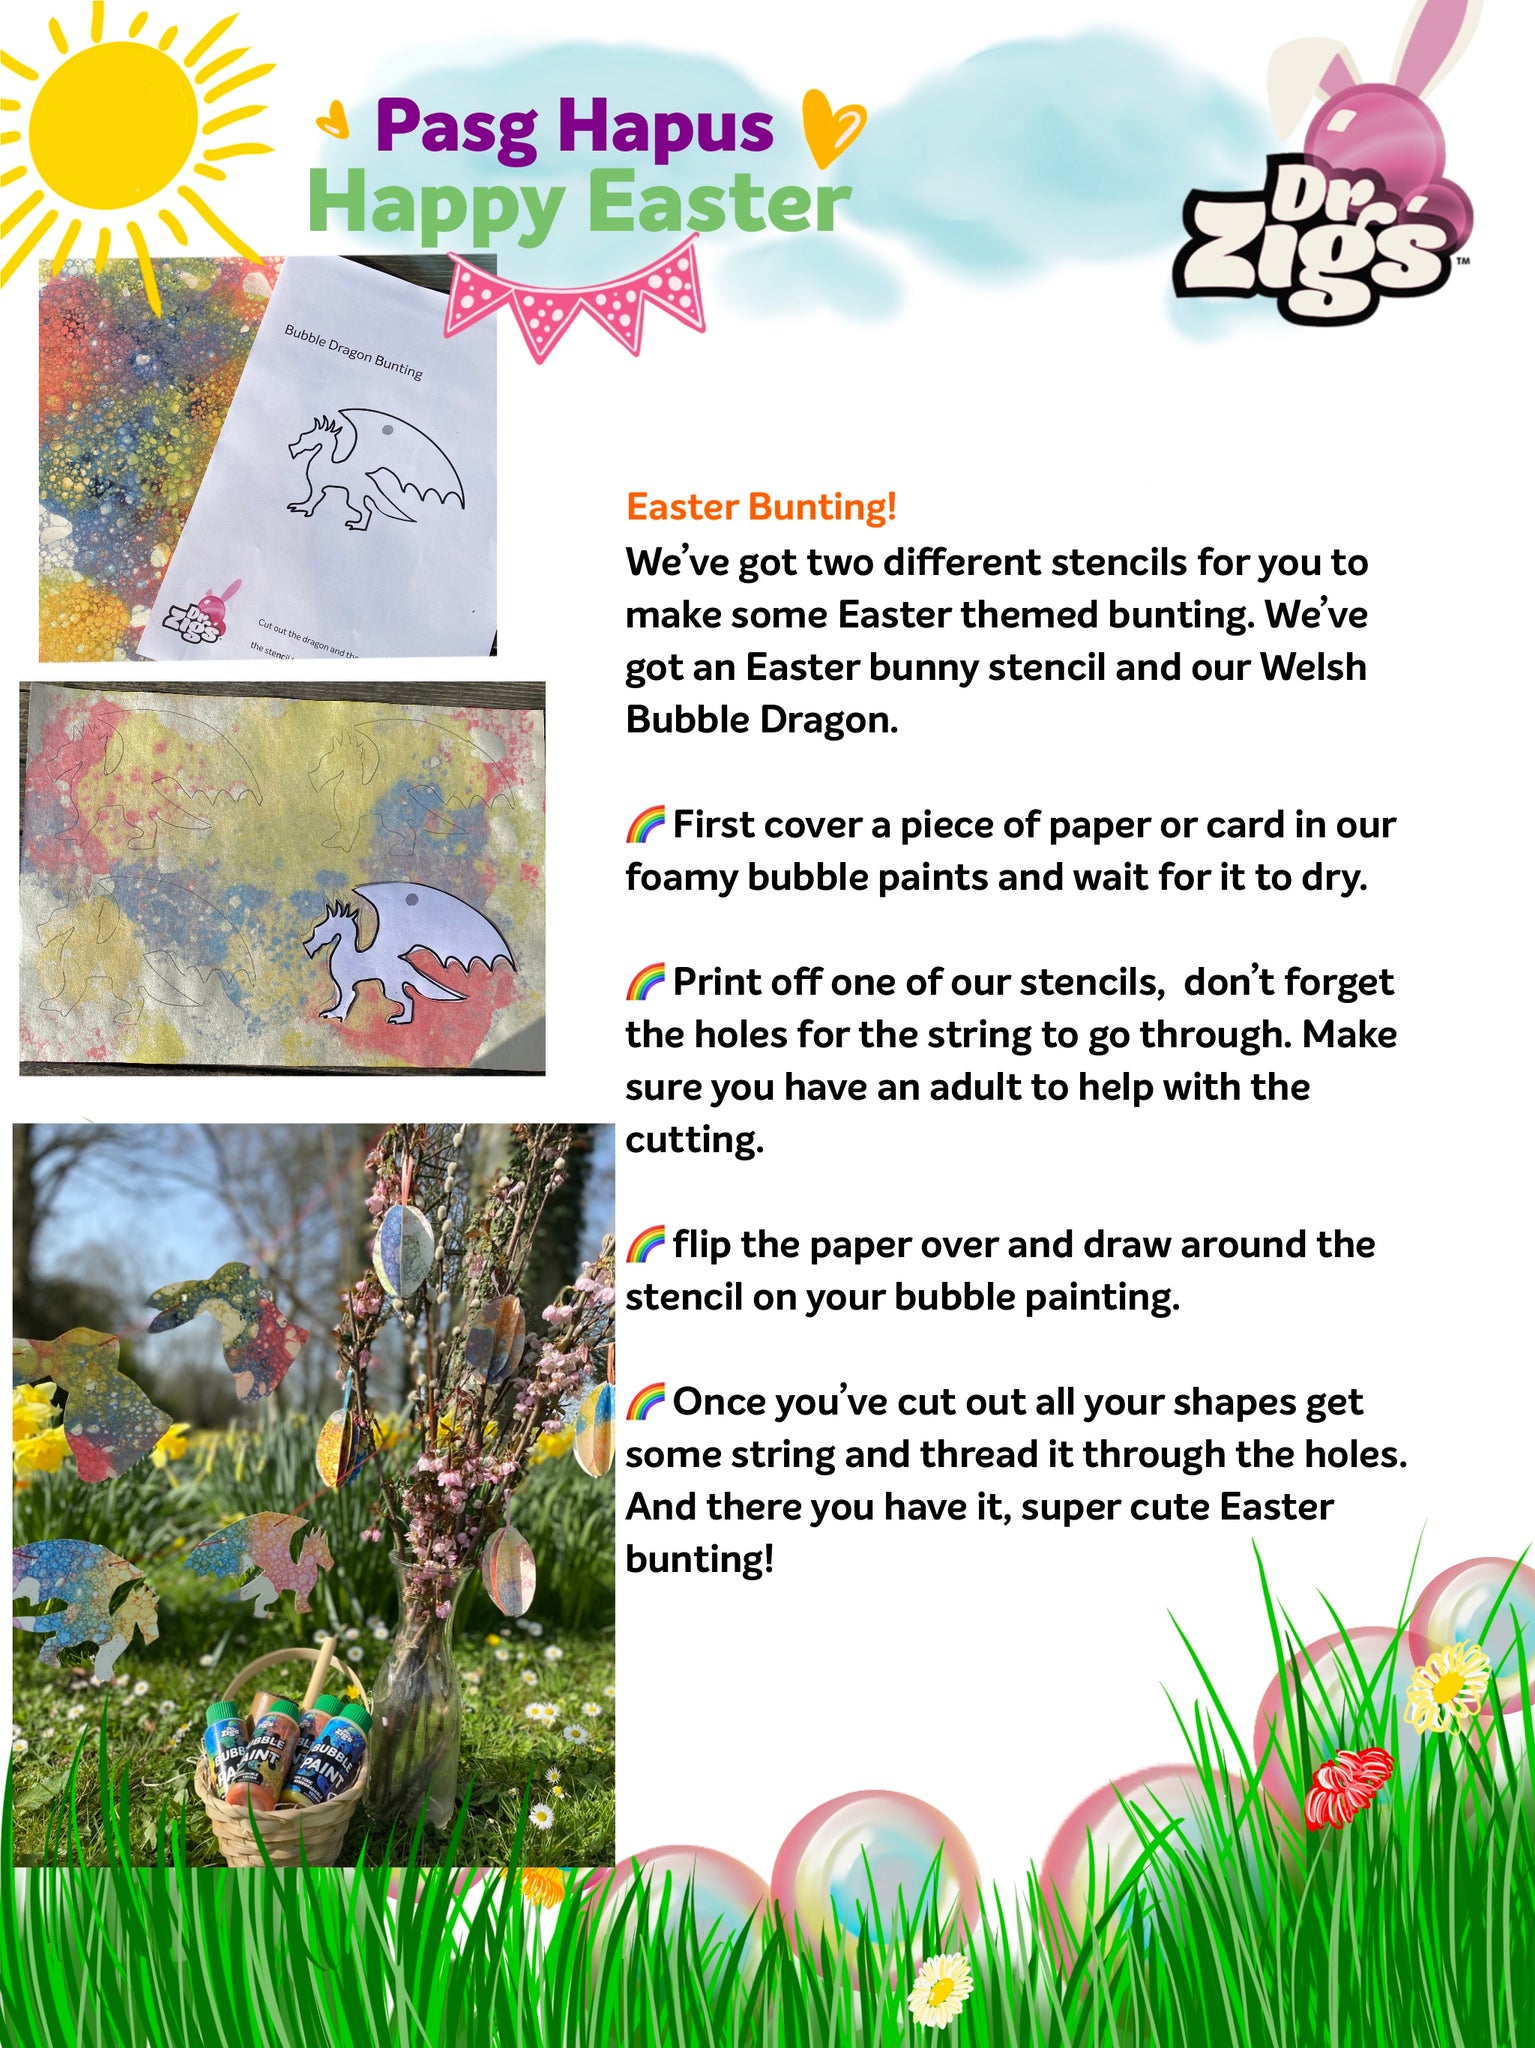 easter activities giant bubbles dr zigs happy fun ideas easter egg hunt eco friendly biodegradable vegan made in Uk toys soap garden fun 3 years old